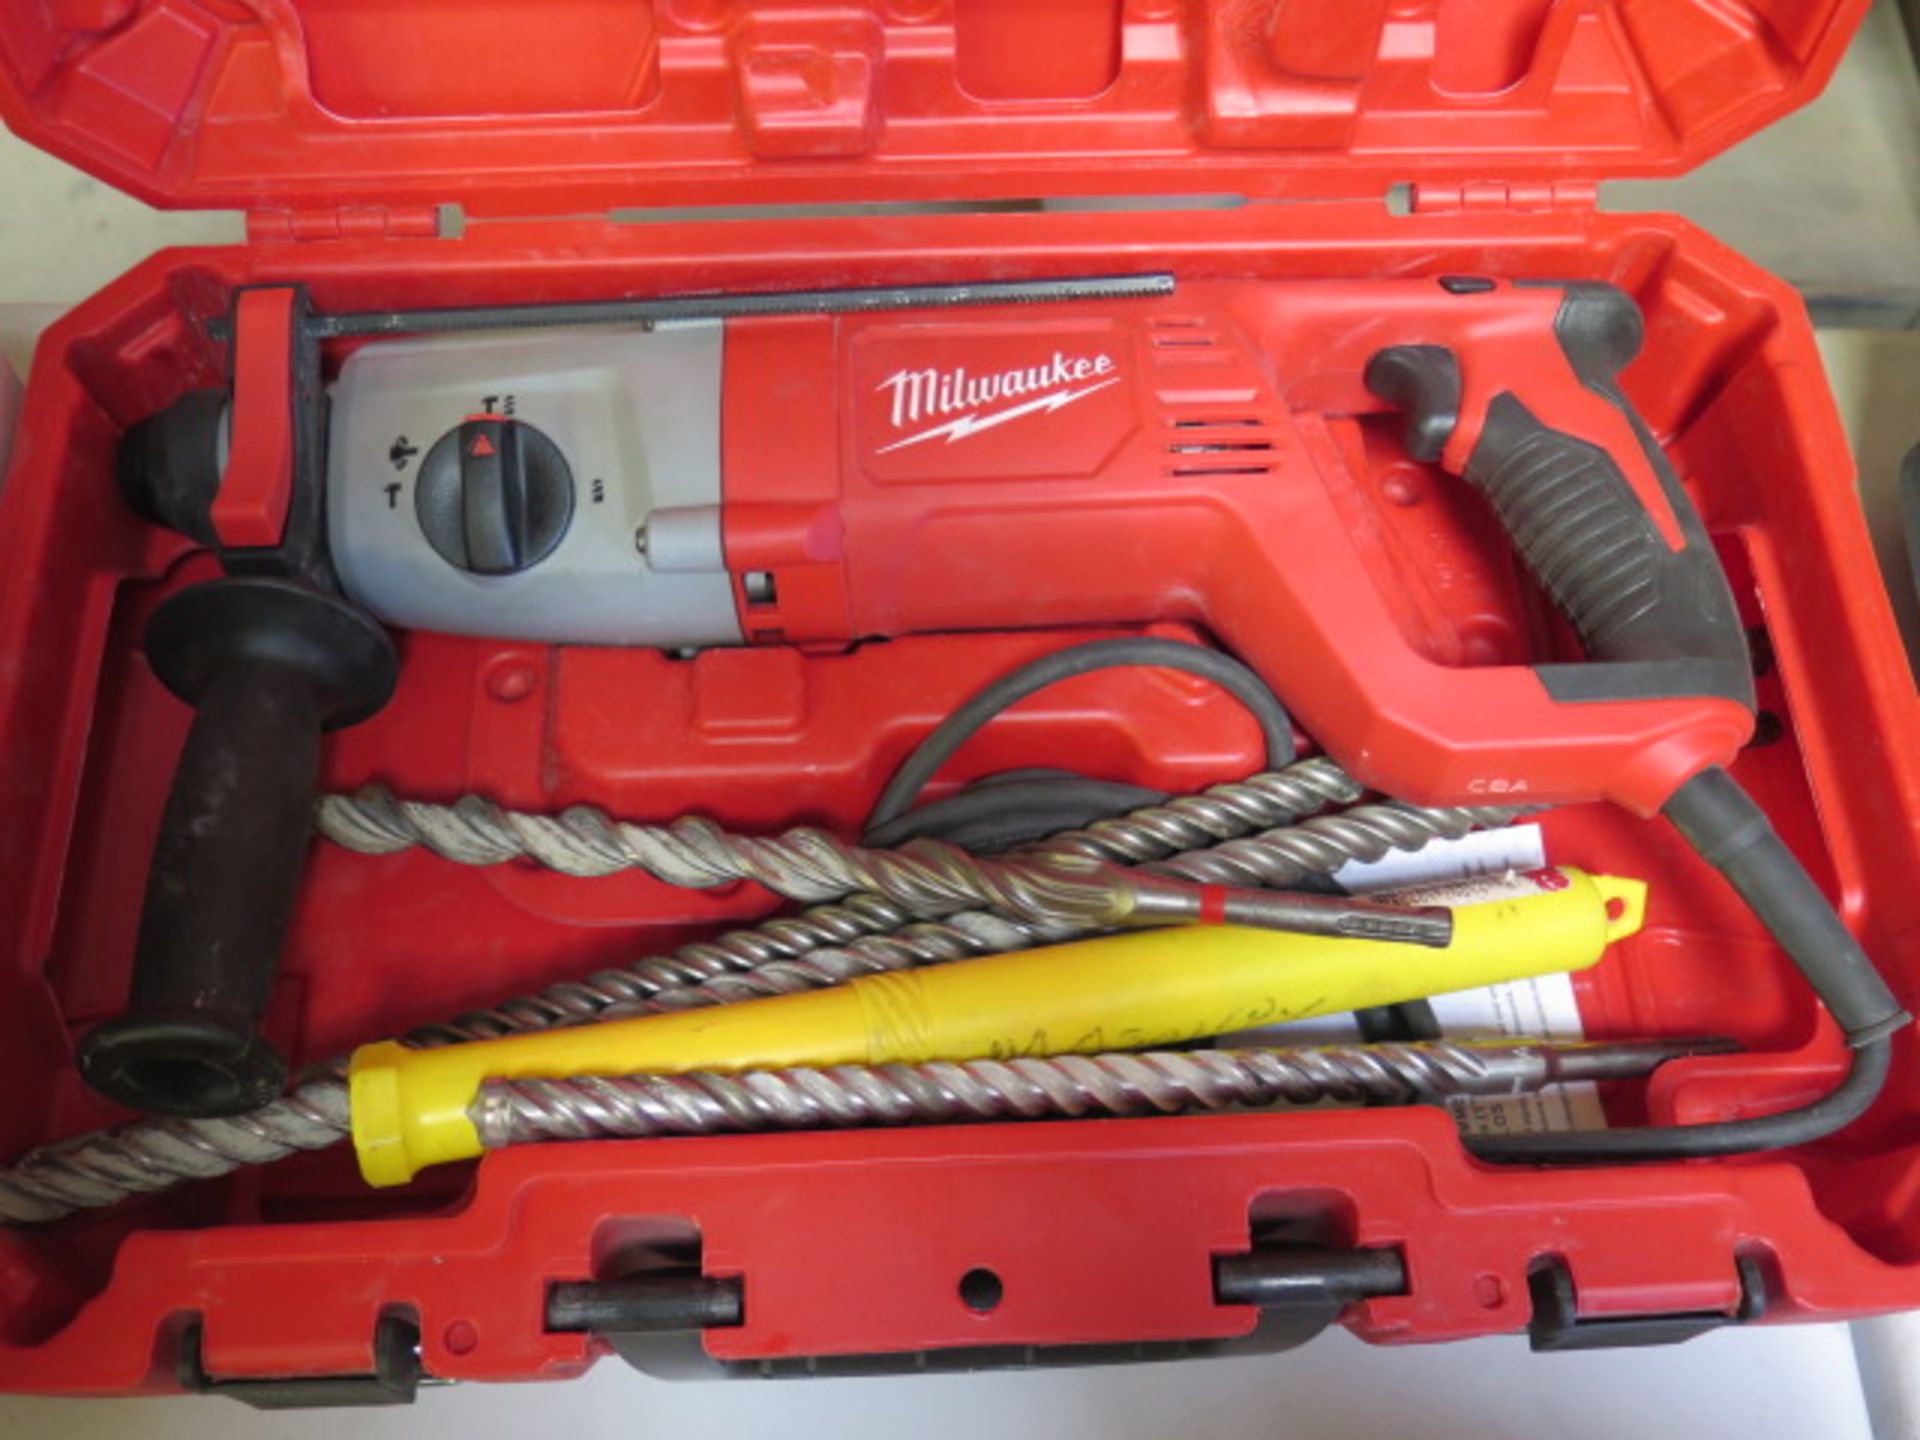 Milwaukee SDS PLUS 1" Rotary Hammer (SOLD AS-IS - NO WARRANTY) - Image 2 of 6